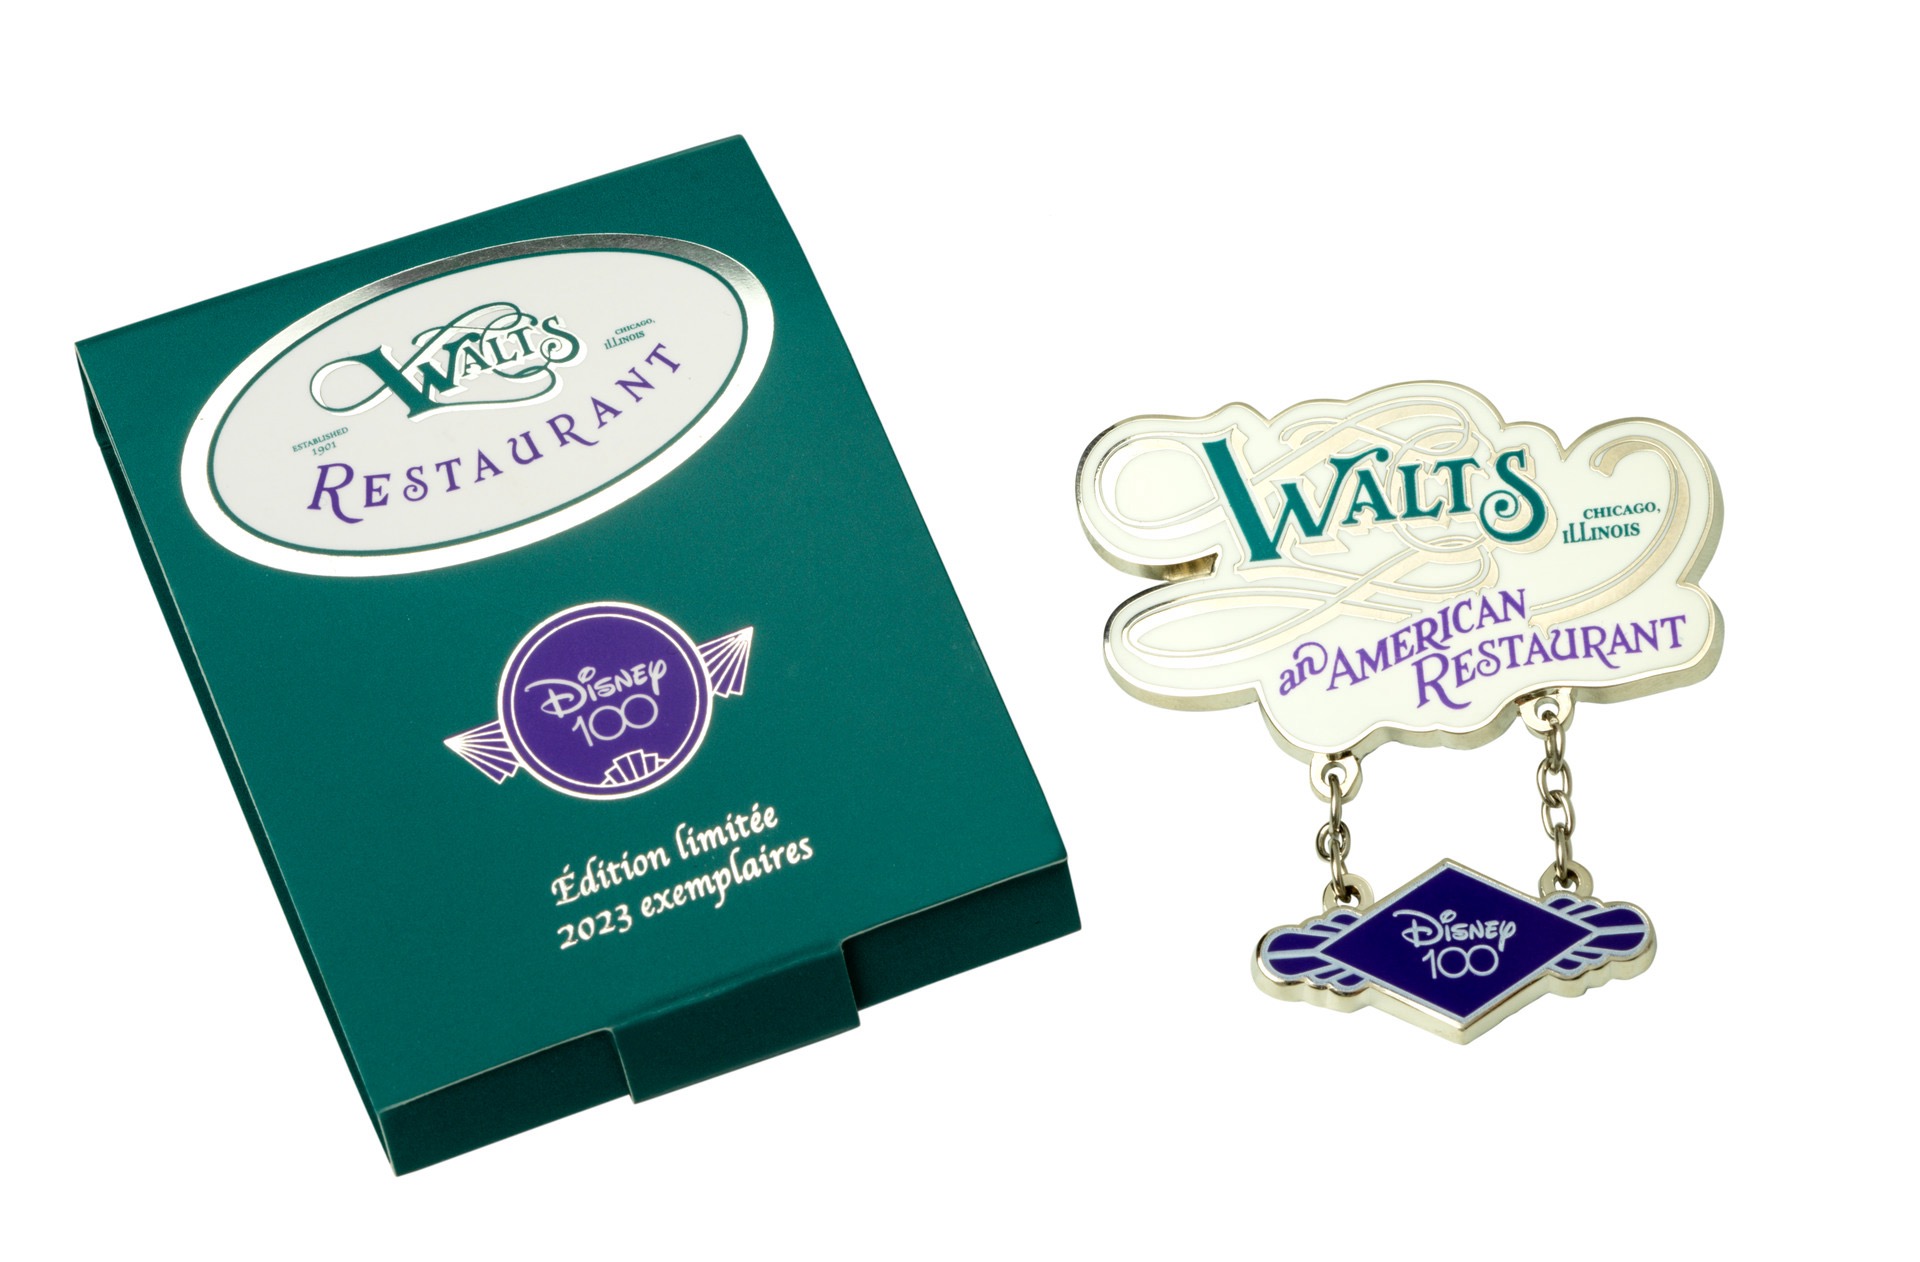 Walts Restaurant – Exclusive Disney 100 Pin Released on October 16th